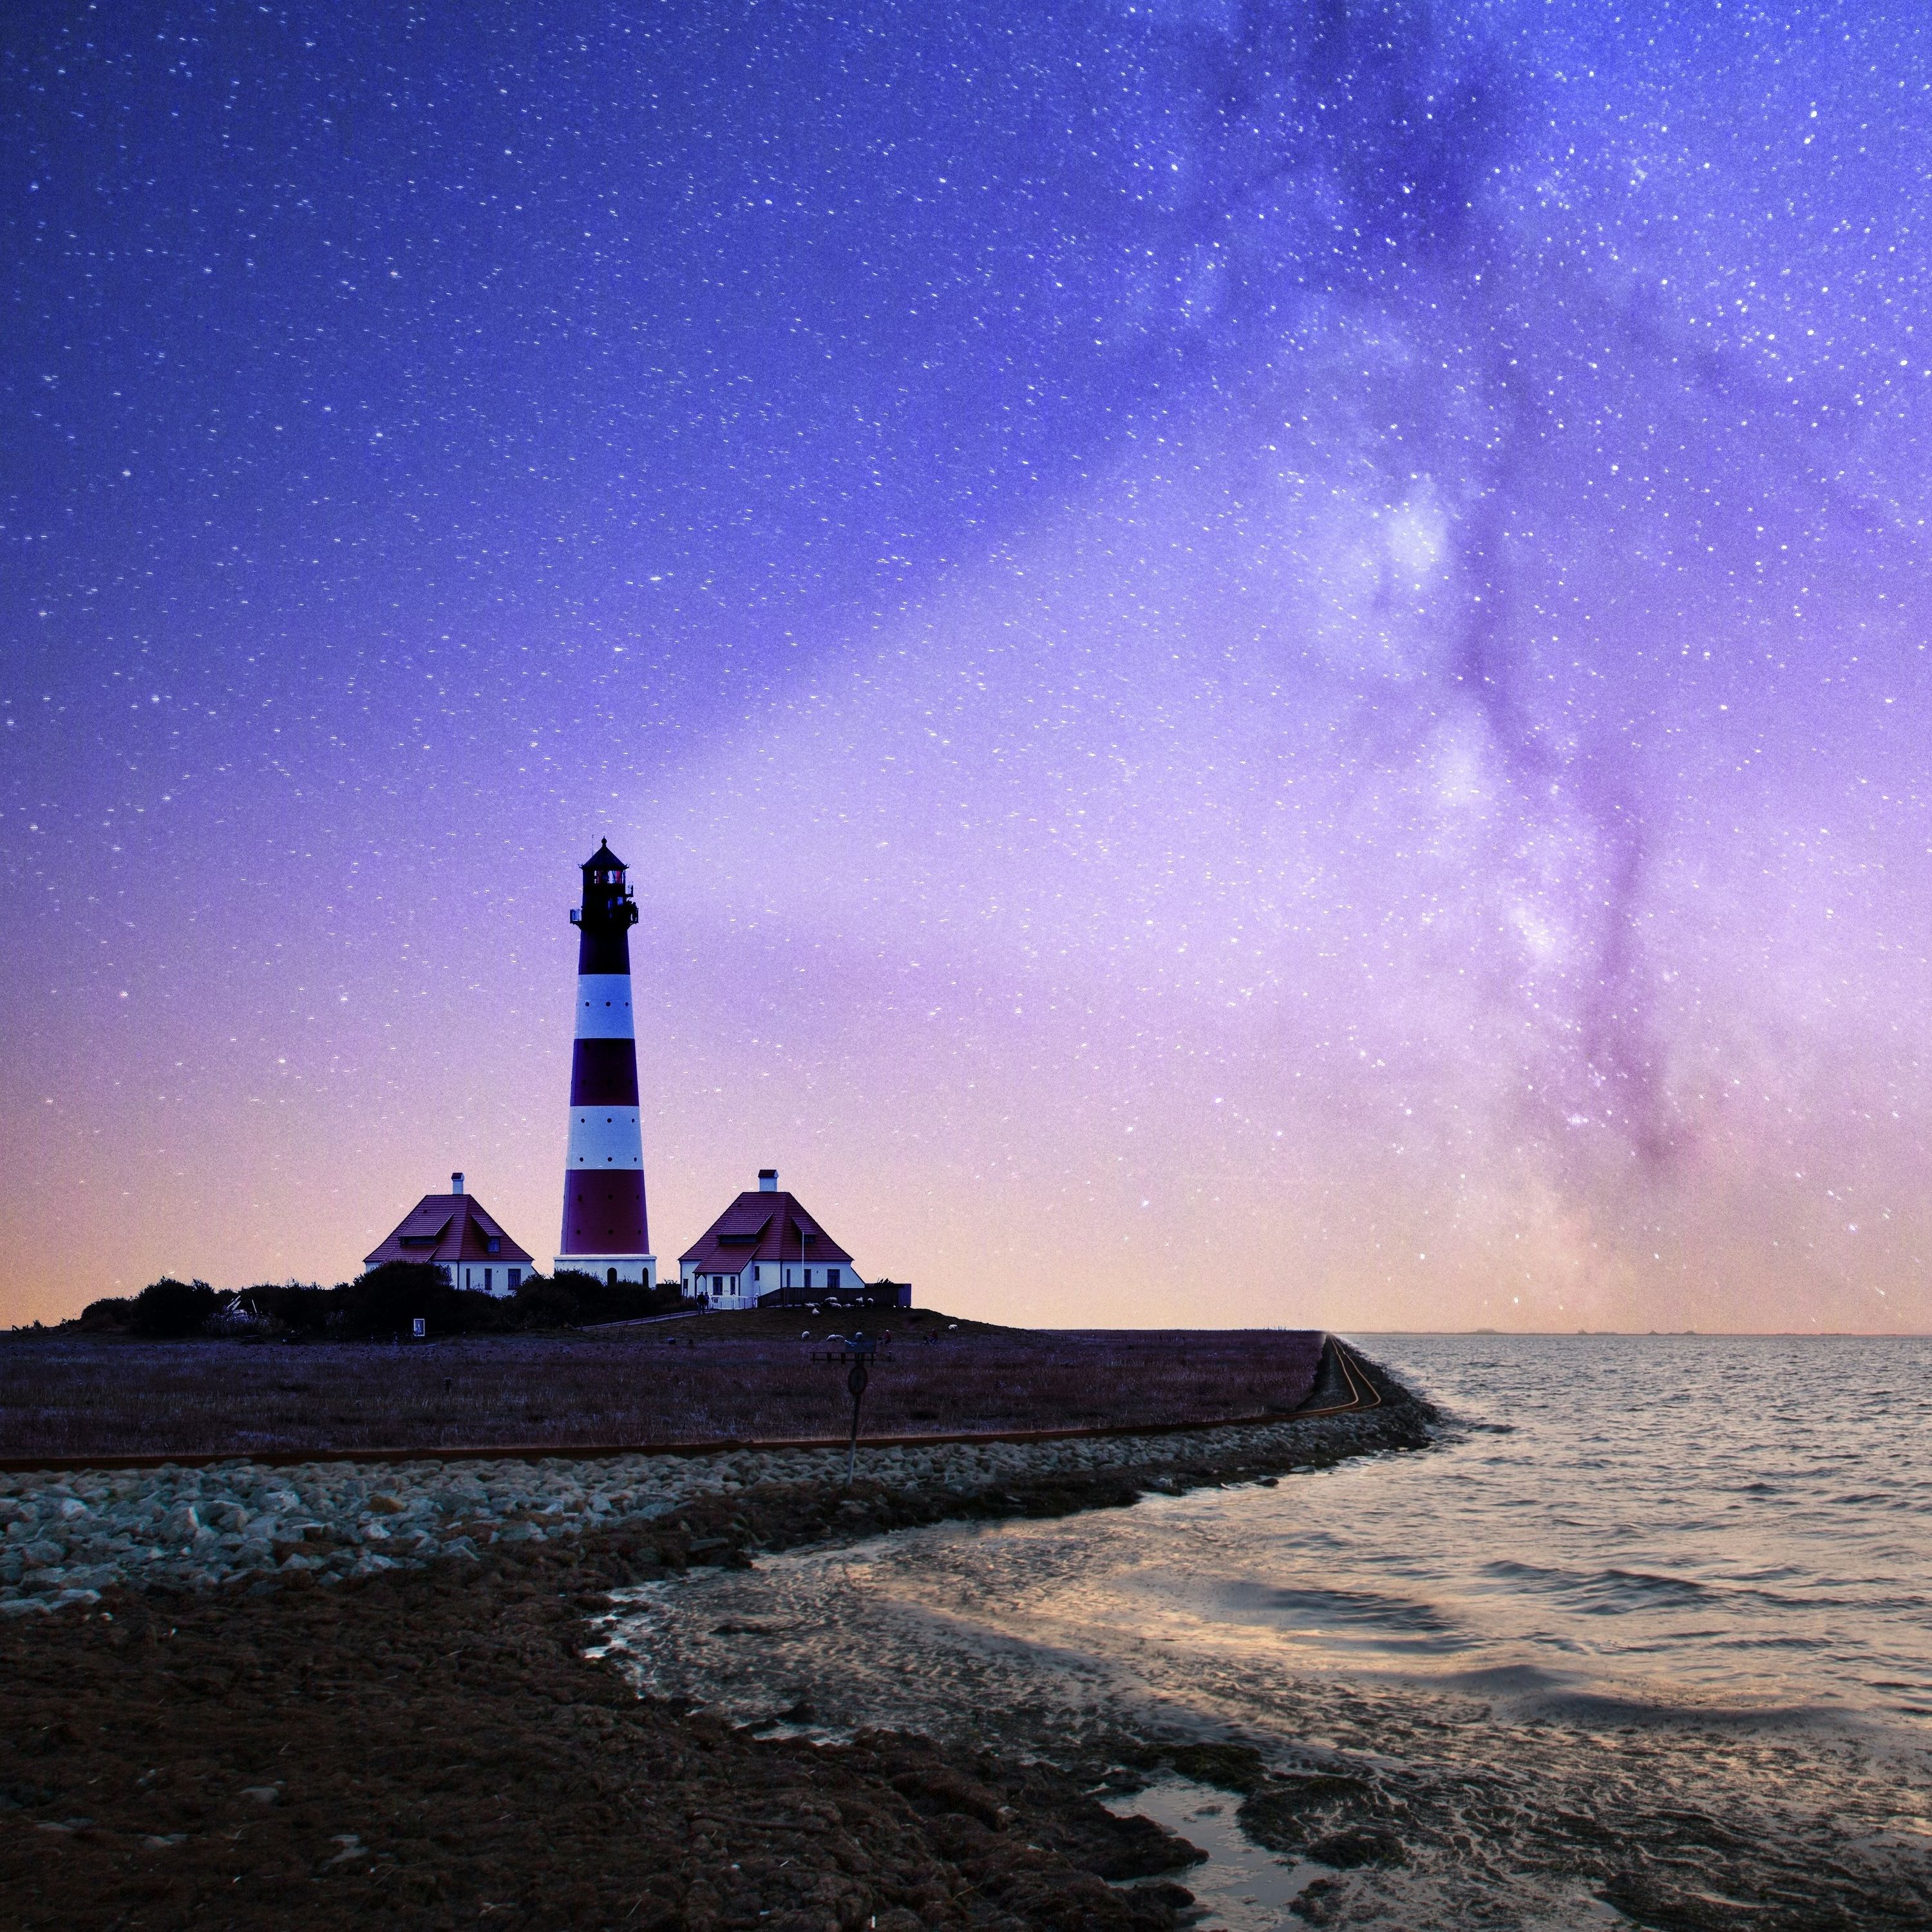 A red and white striped lighthouse shining out against the sea backdropped by a purple sky filled with nebula.